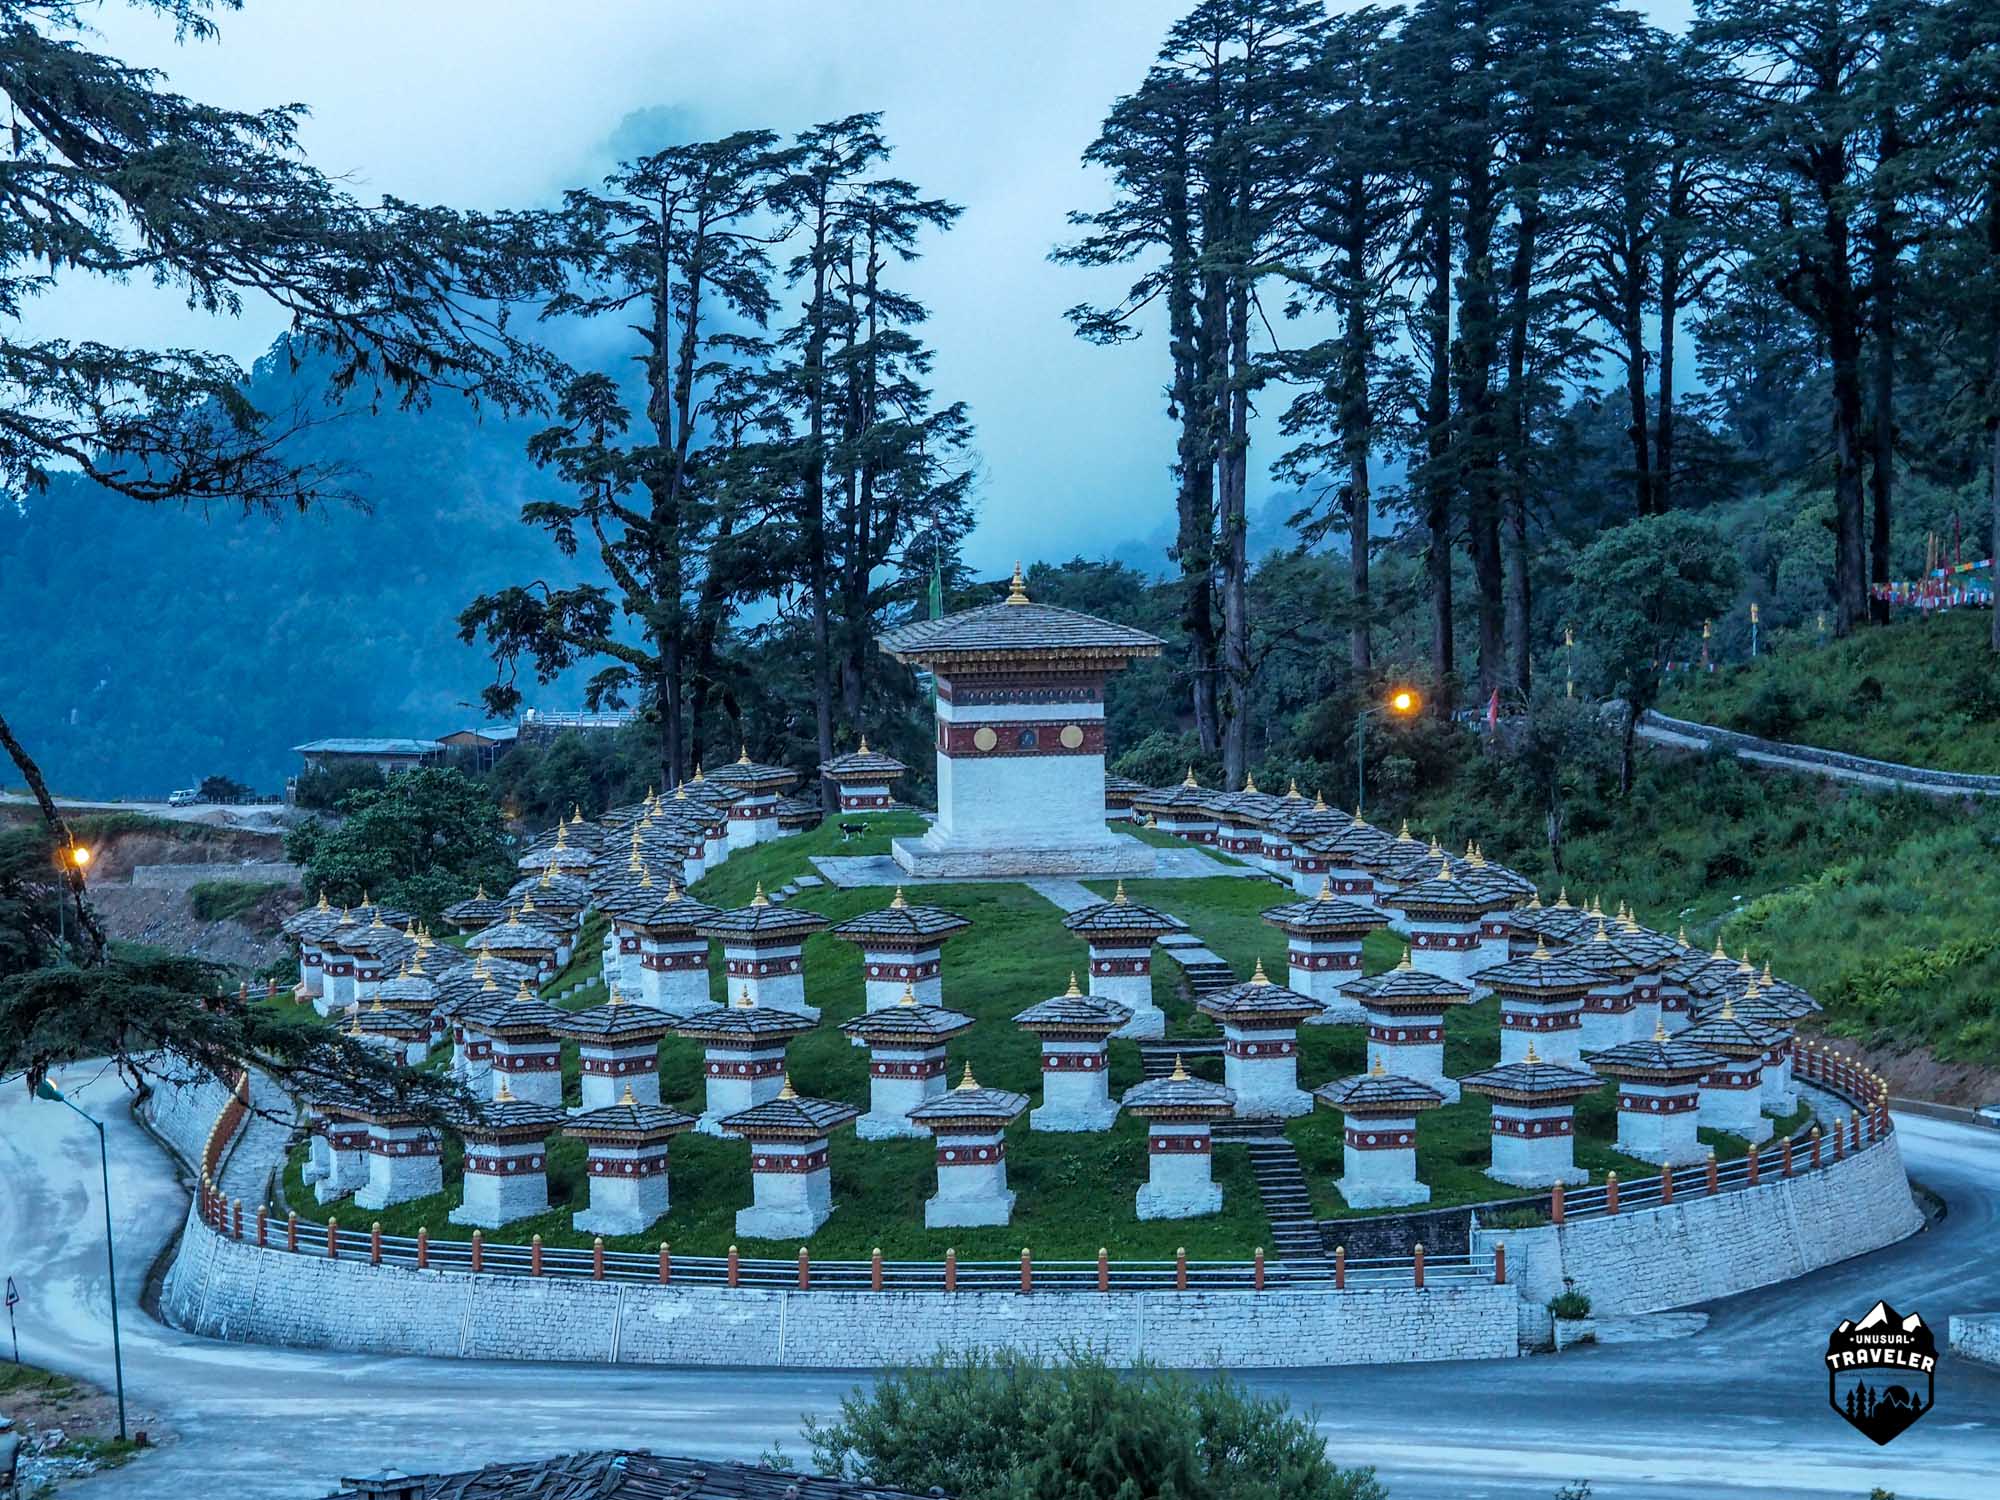 Dochula Pass just before sunset, on a cloudy day in Bhutan